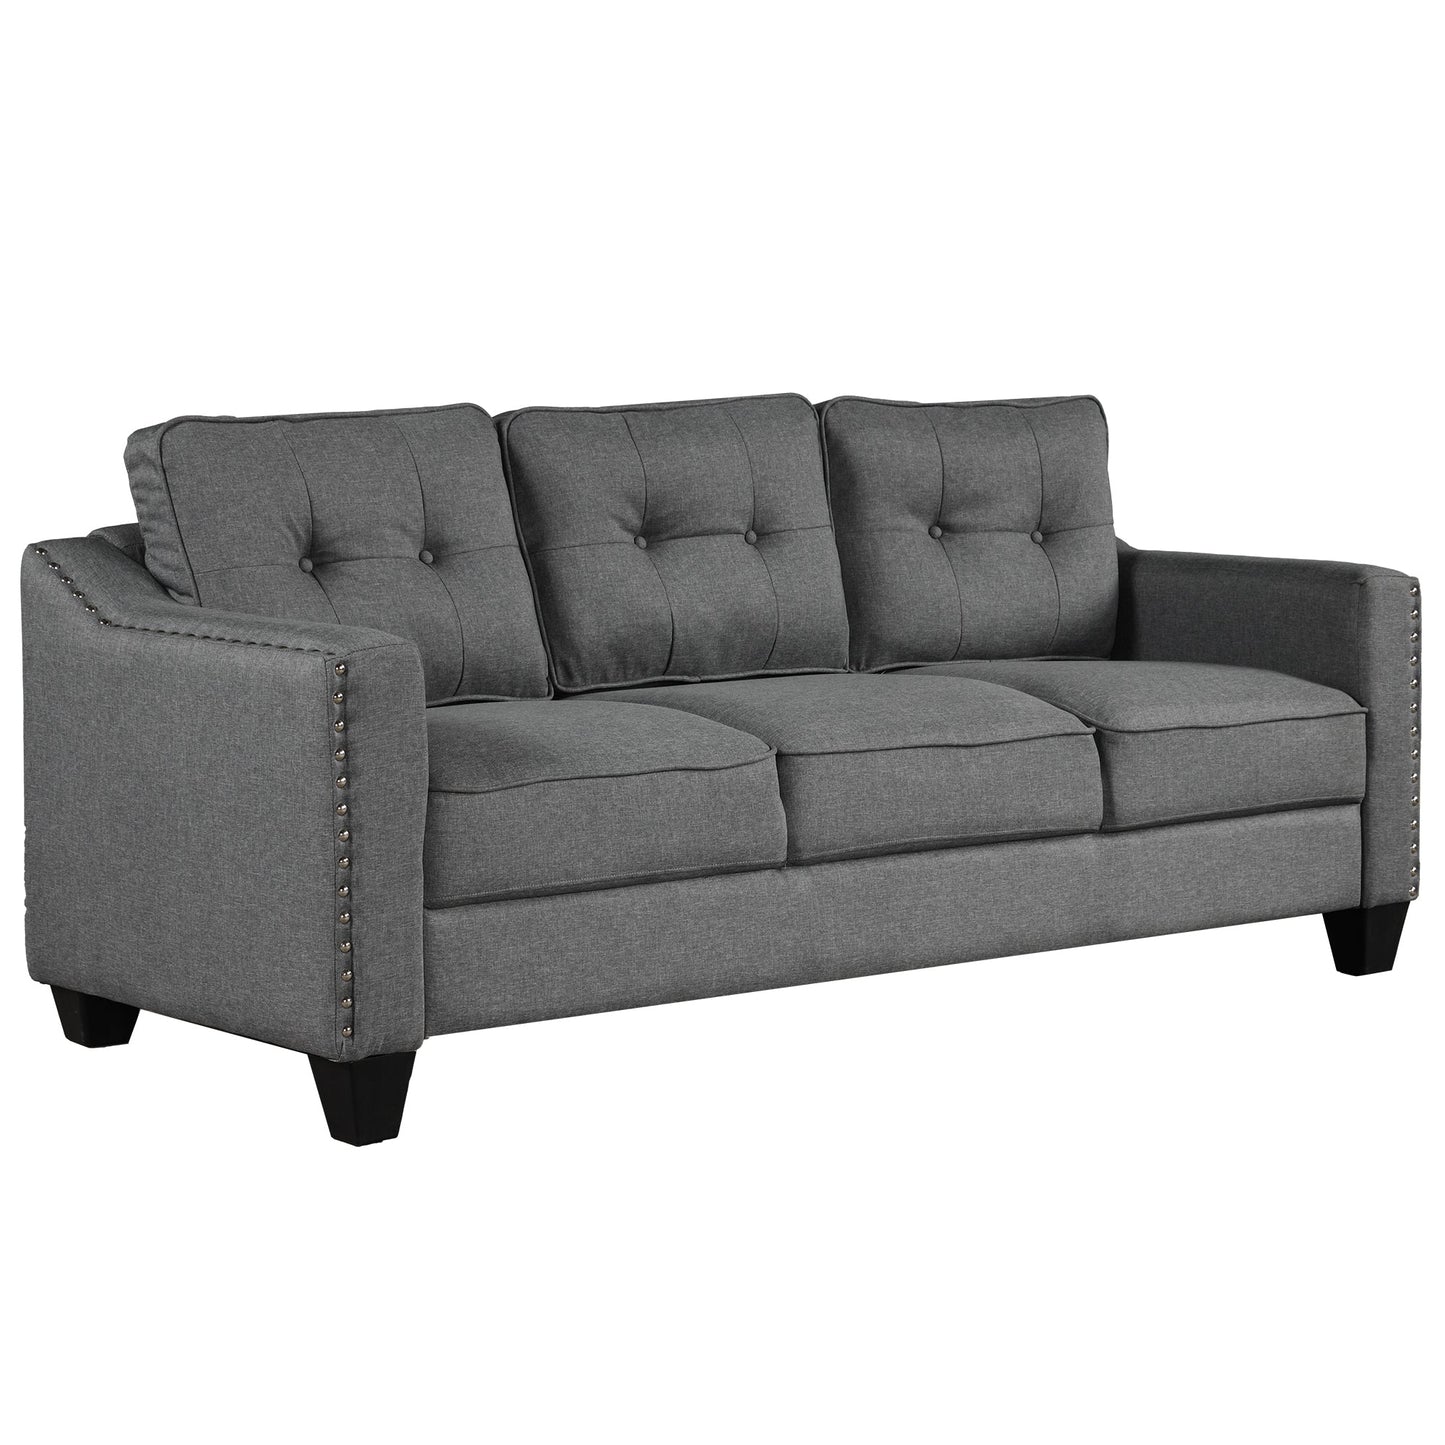 3 Piece Living Room Set with tufted cushions.